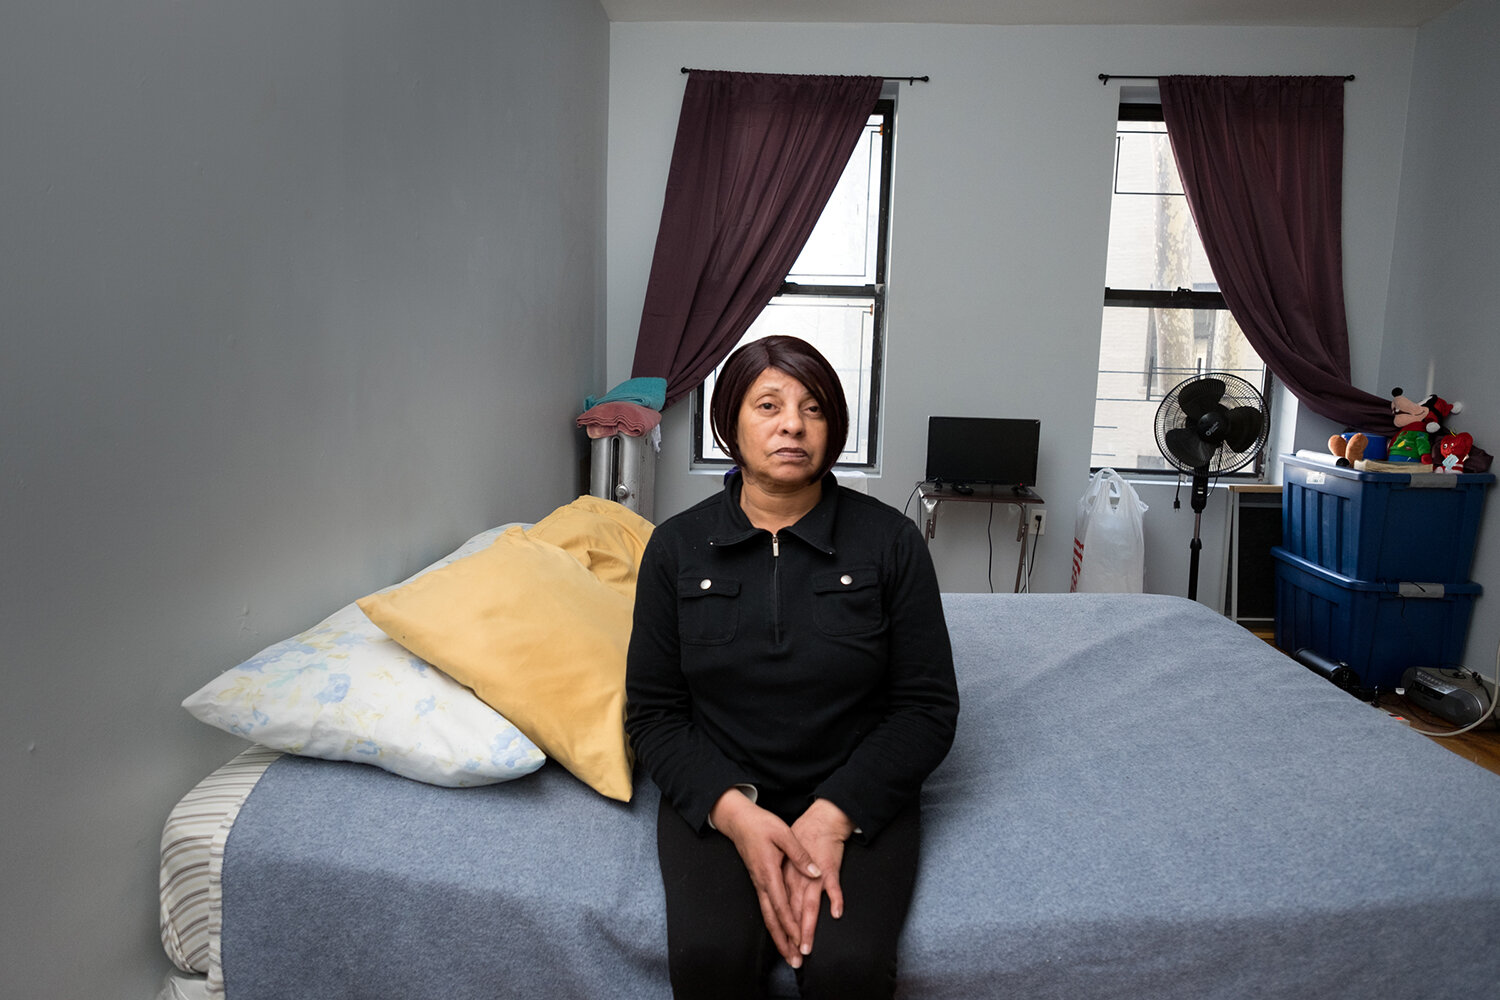  Valerie, 62, in an apartment she shares with a roommate. Bronx, NY, 2018. Image © Sara Bennett. 